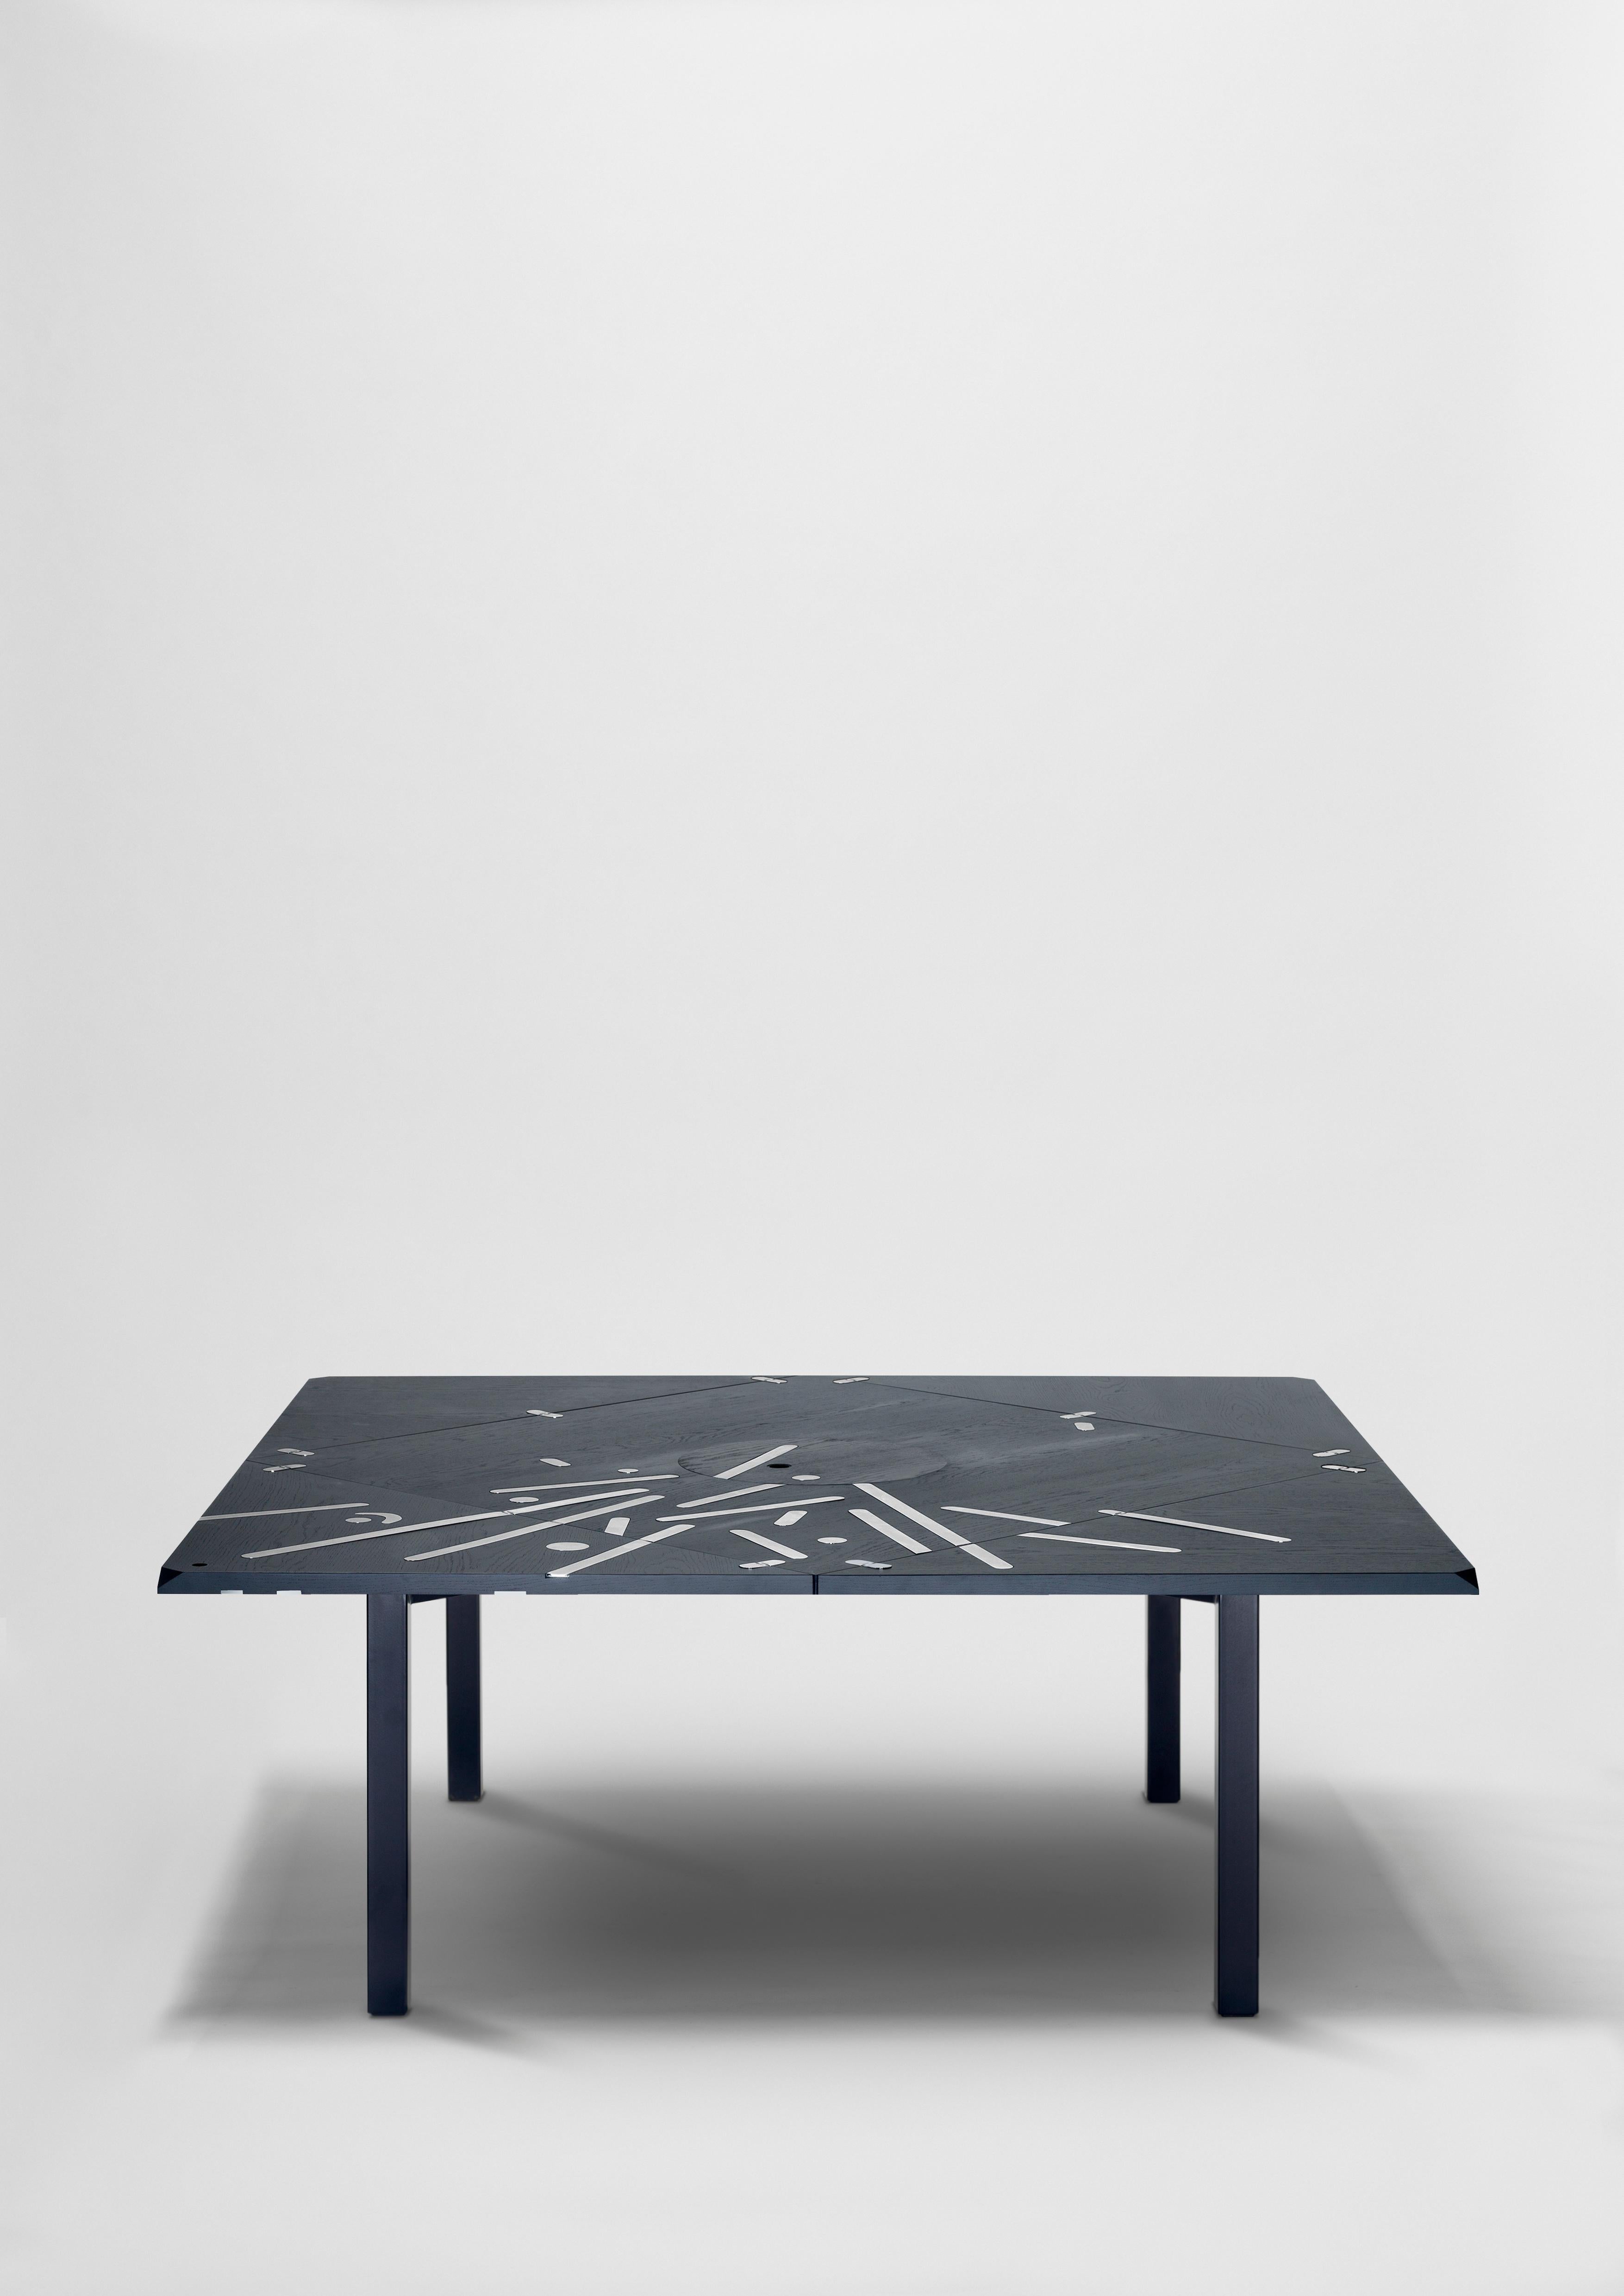 Some years ago, LLuis Clotet invented an ingenious system to enlargen the surface of a table. It was gradually perfected with tie, and with the patience of an artist that knows that all the details of his work are important. It is called Alella, the